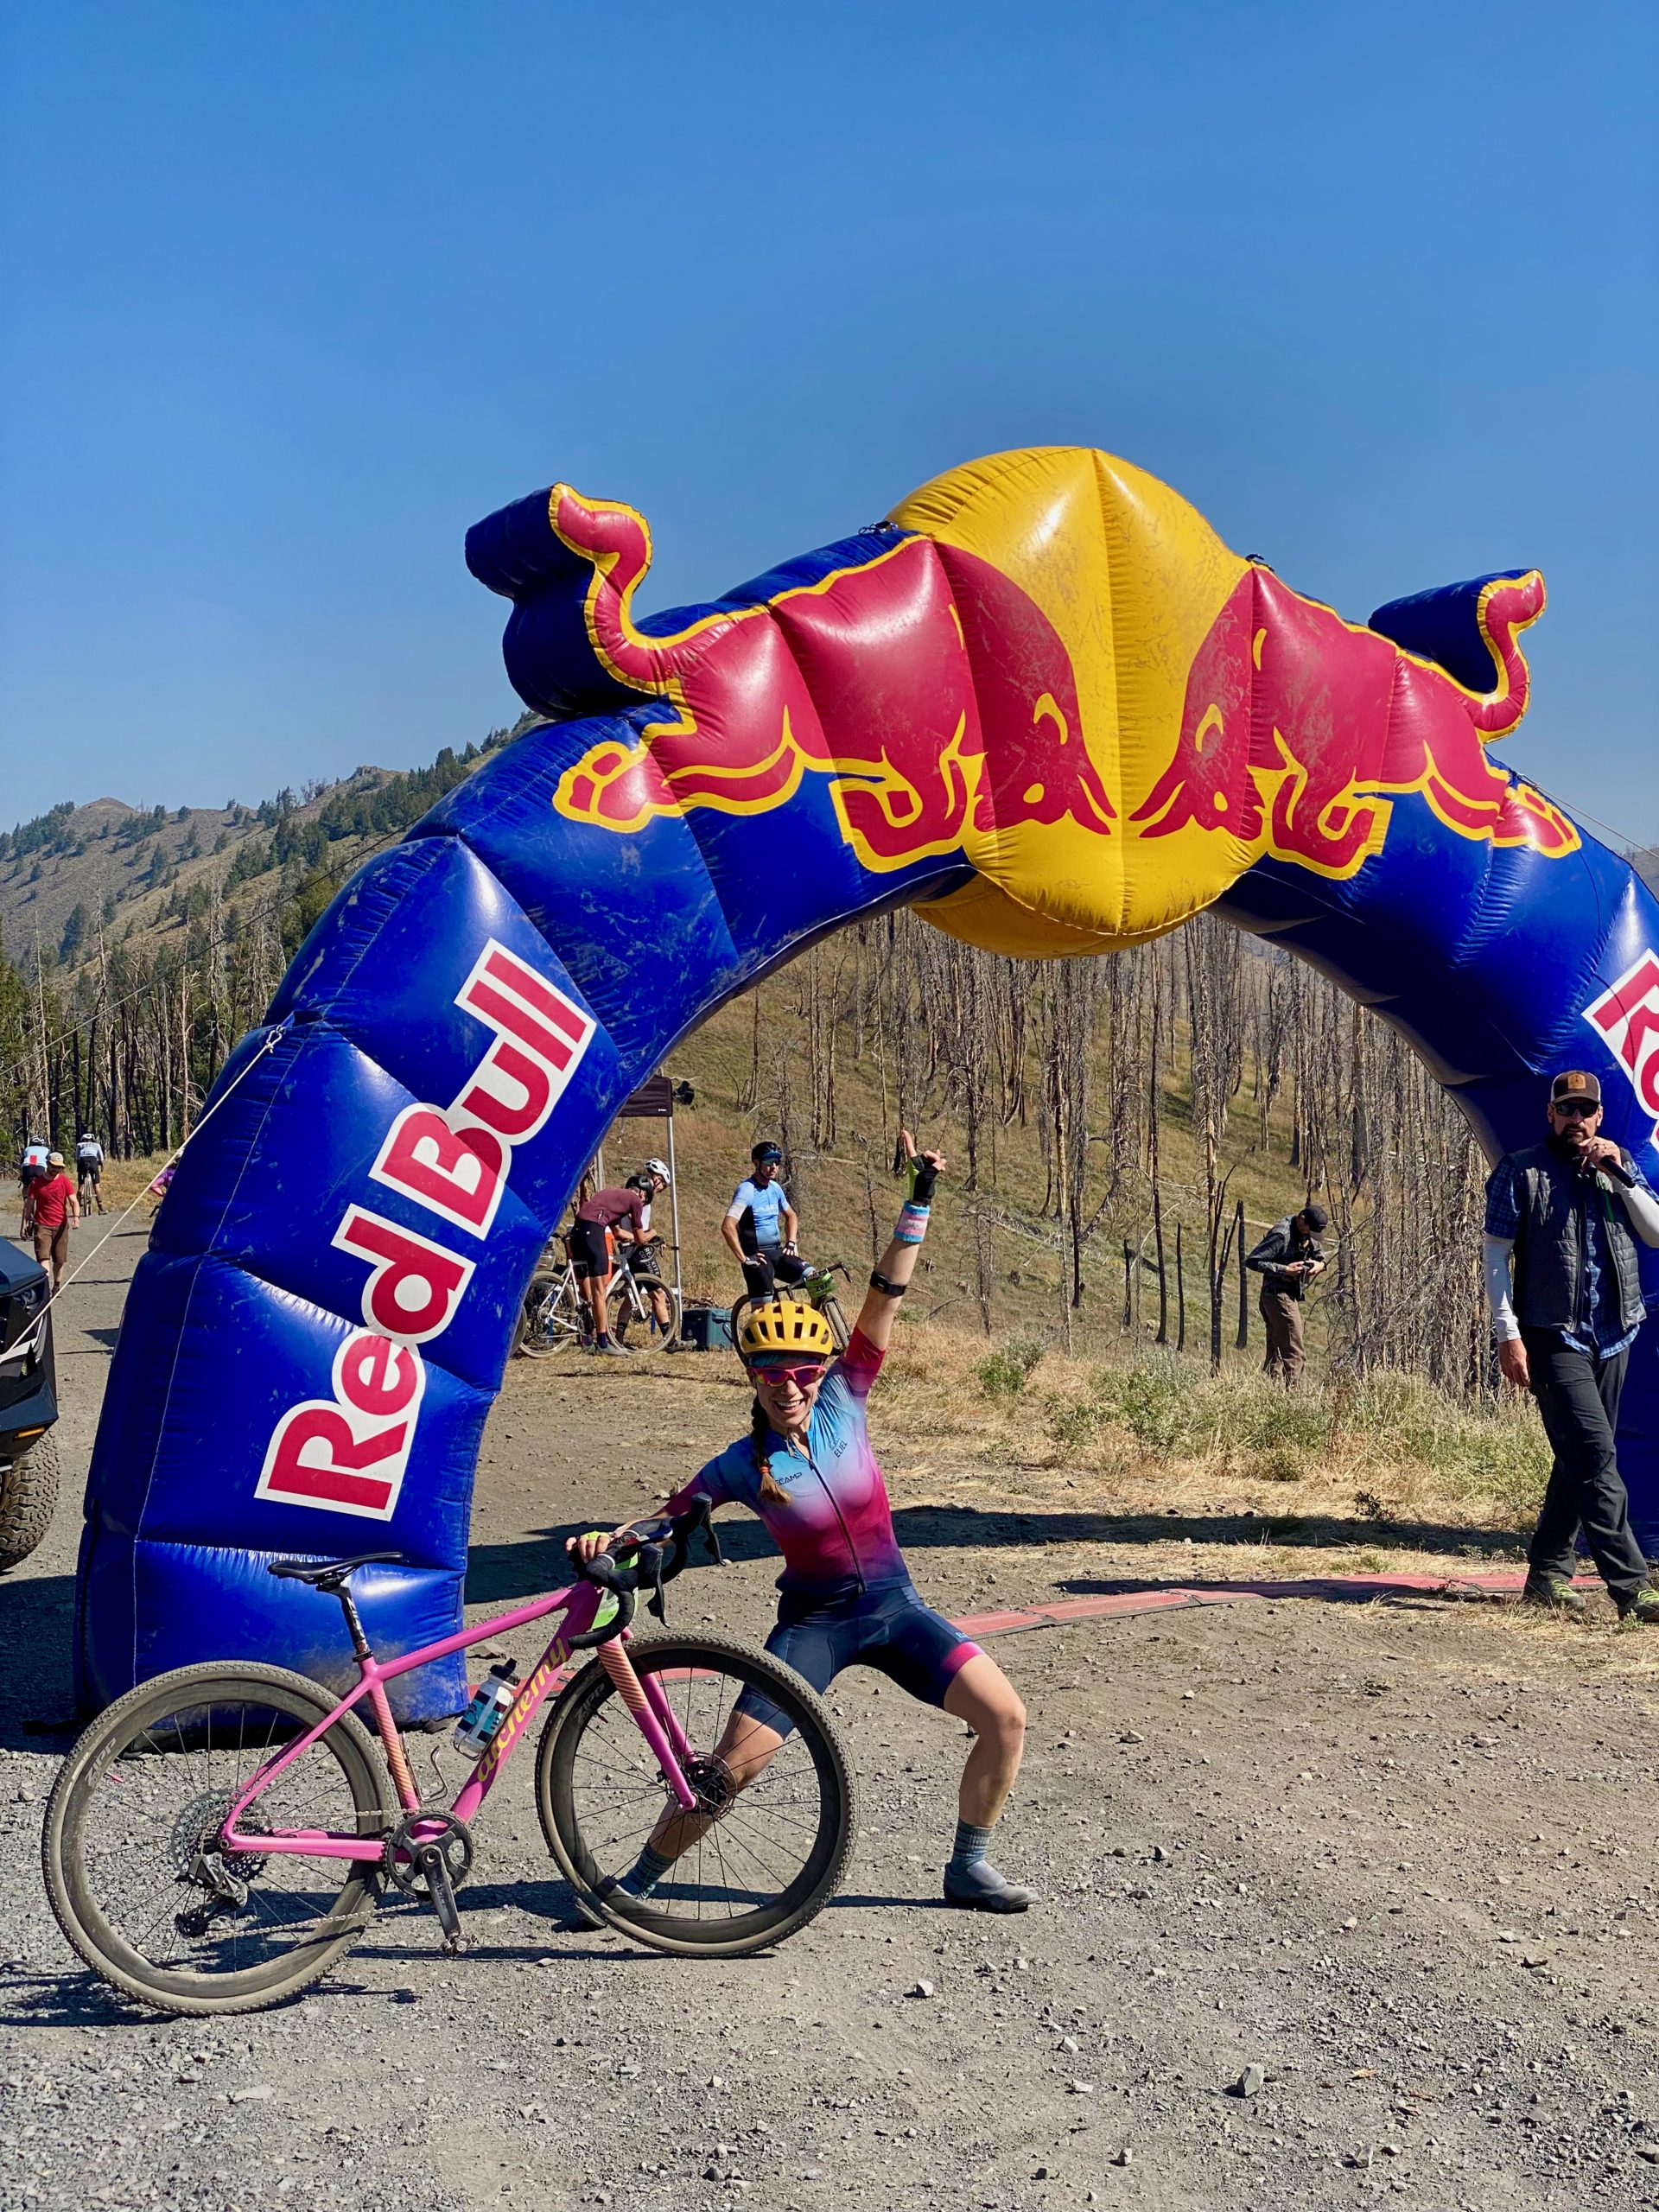 Woman in bike kit poses triumphantly with her bike under a large Red Bull banner